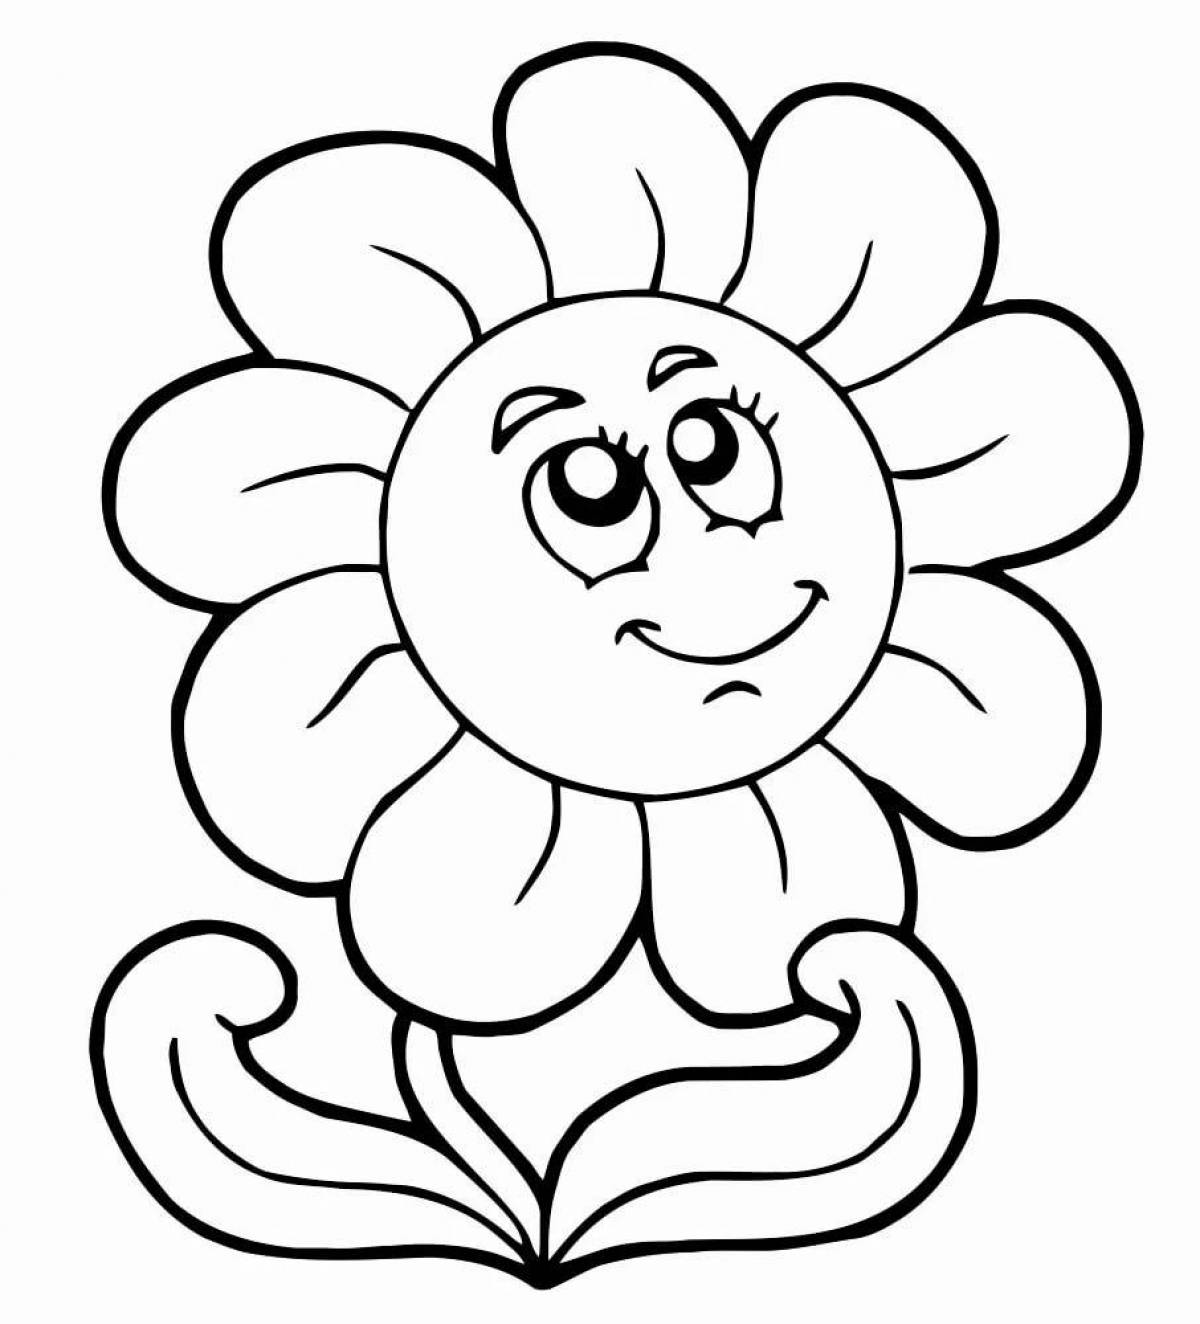 Charming coloring flower picture